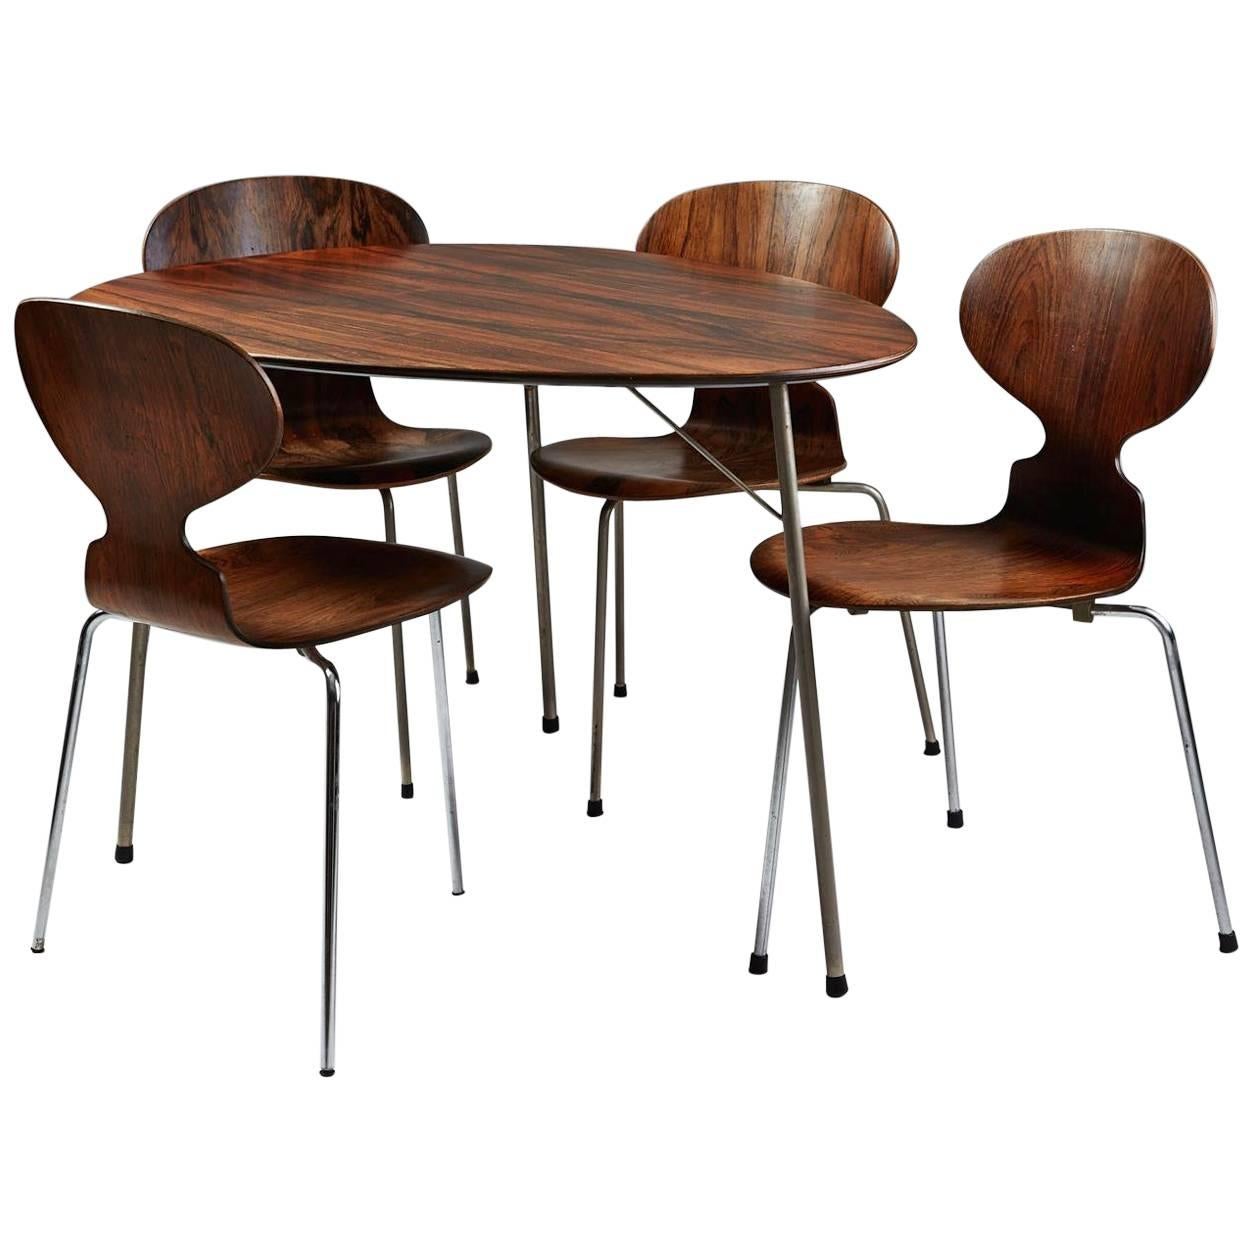 Dining Table and Four Chairs, Designed by Arne Jacobsen for Fritz Hansen